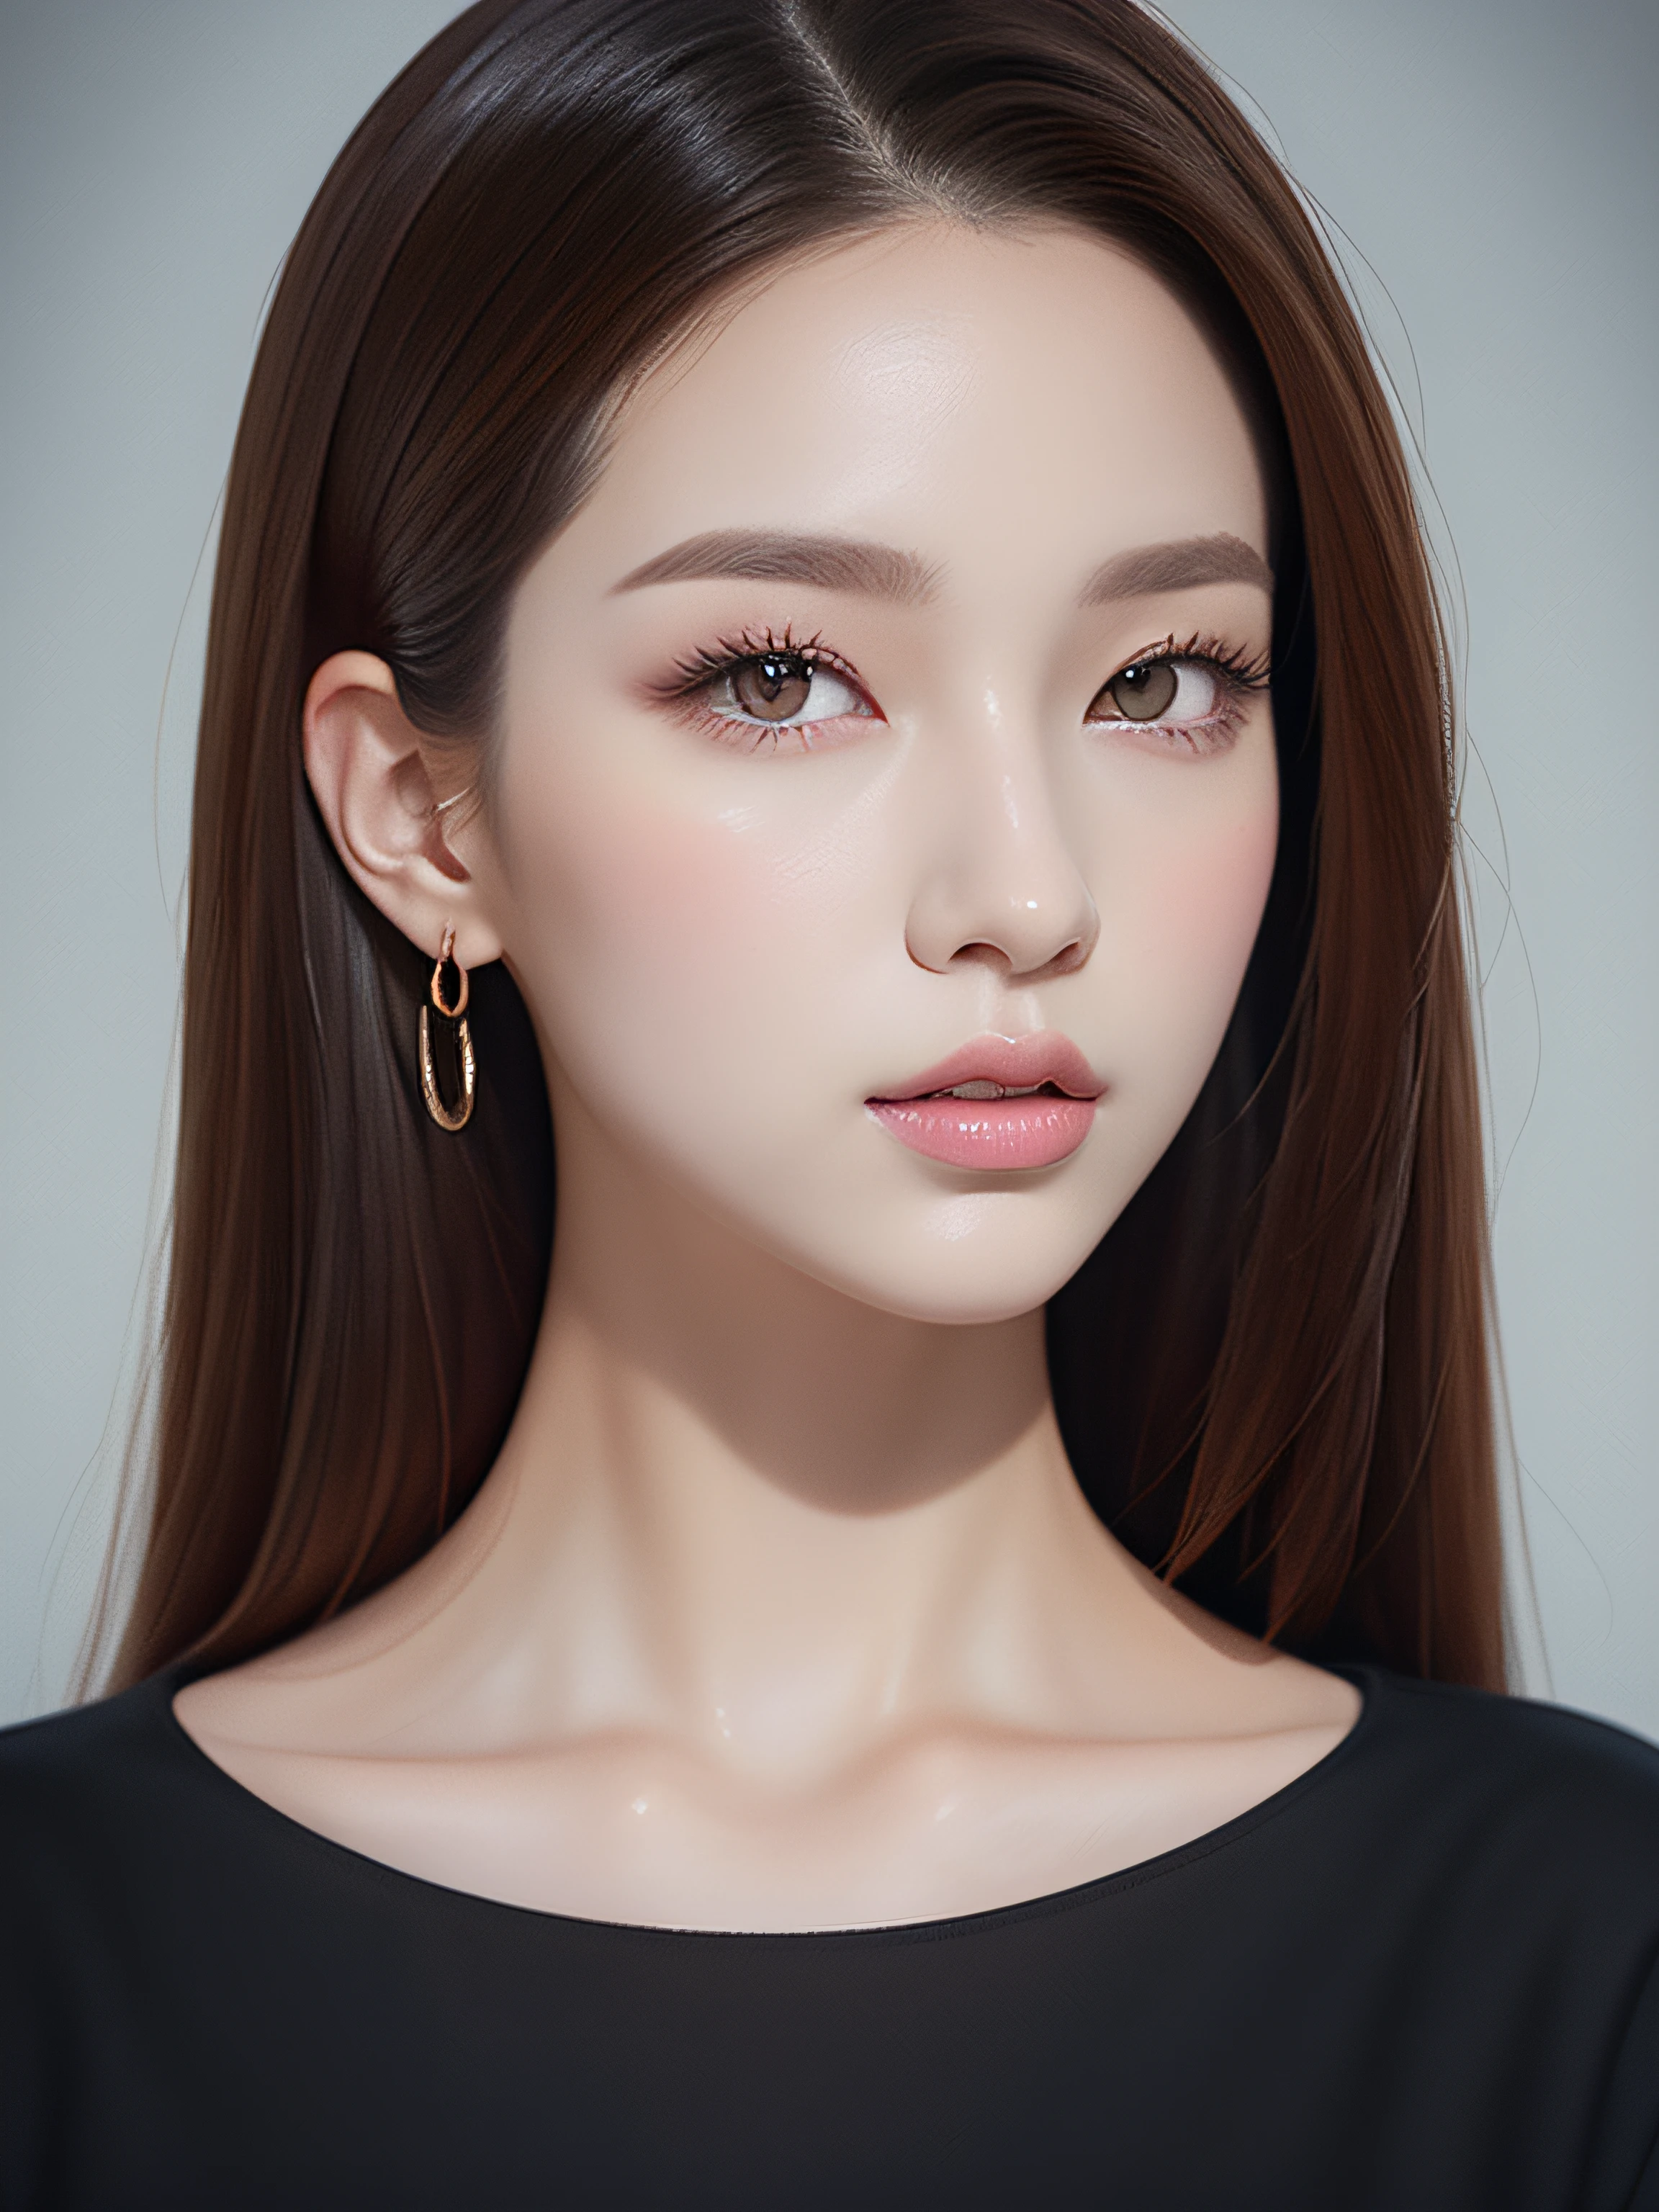 Portrait of a woman with long hair and a black shirt, digital illustration portrait, in the art style of bowater, portrait of jossi of blackpink, digitalportrait, Digital Art Portrait, realism artstyle, high quality portrait, 🤤 girl portrait, realistic art style, # 1 digital painting of all time, #1 digital painting of all time, glossy digital painting